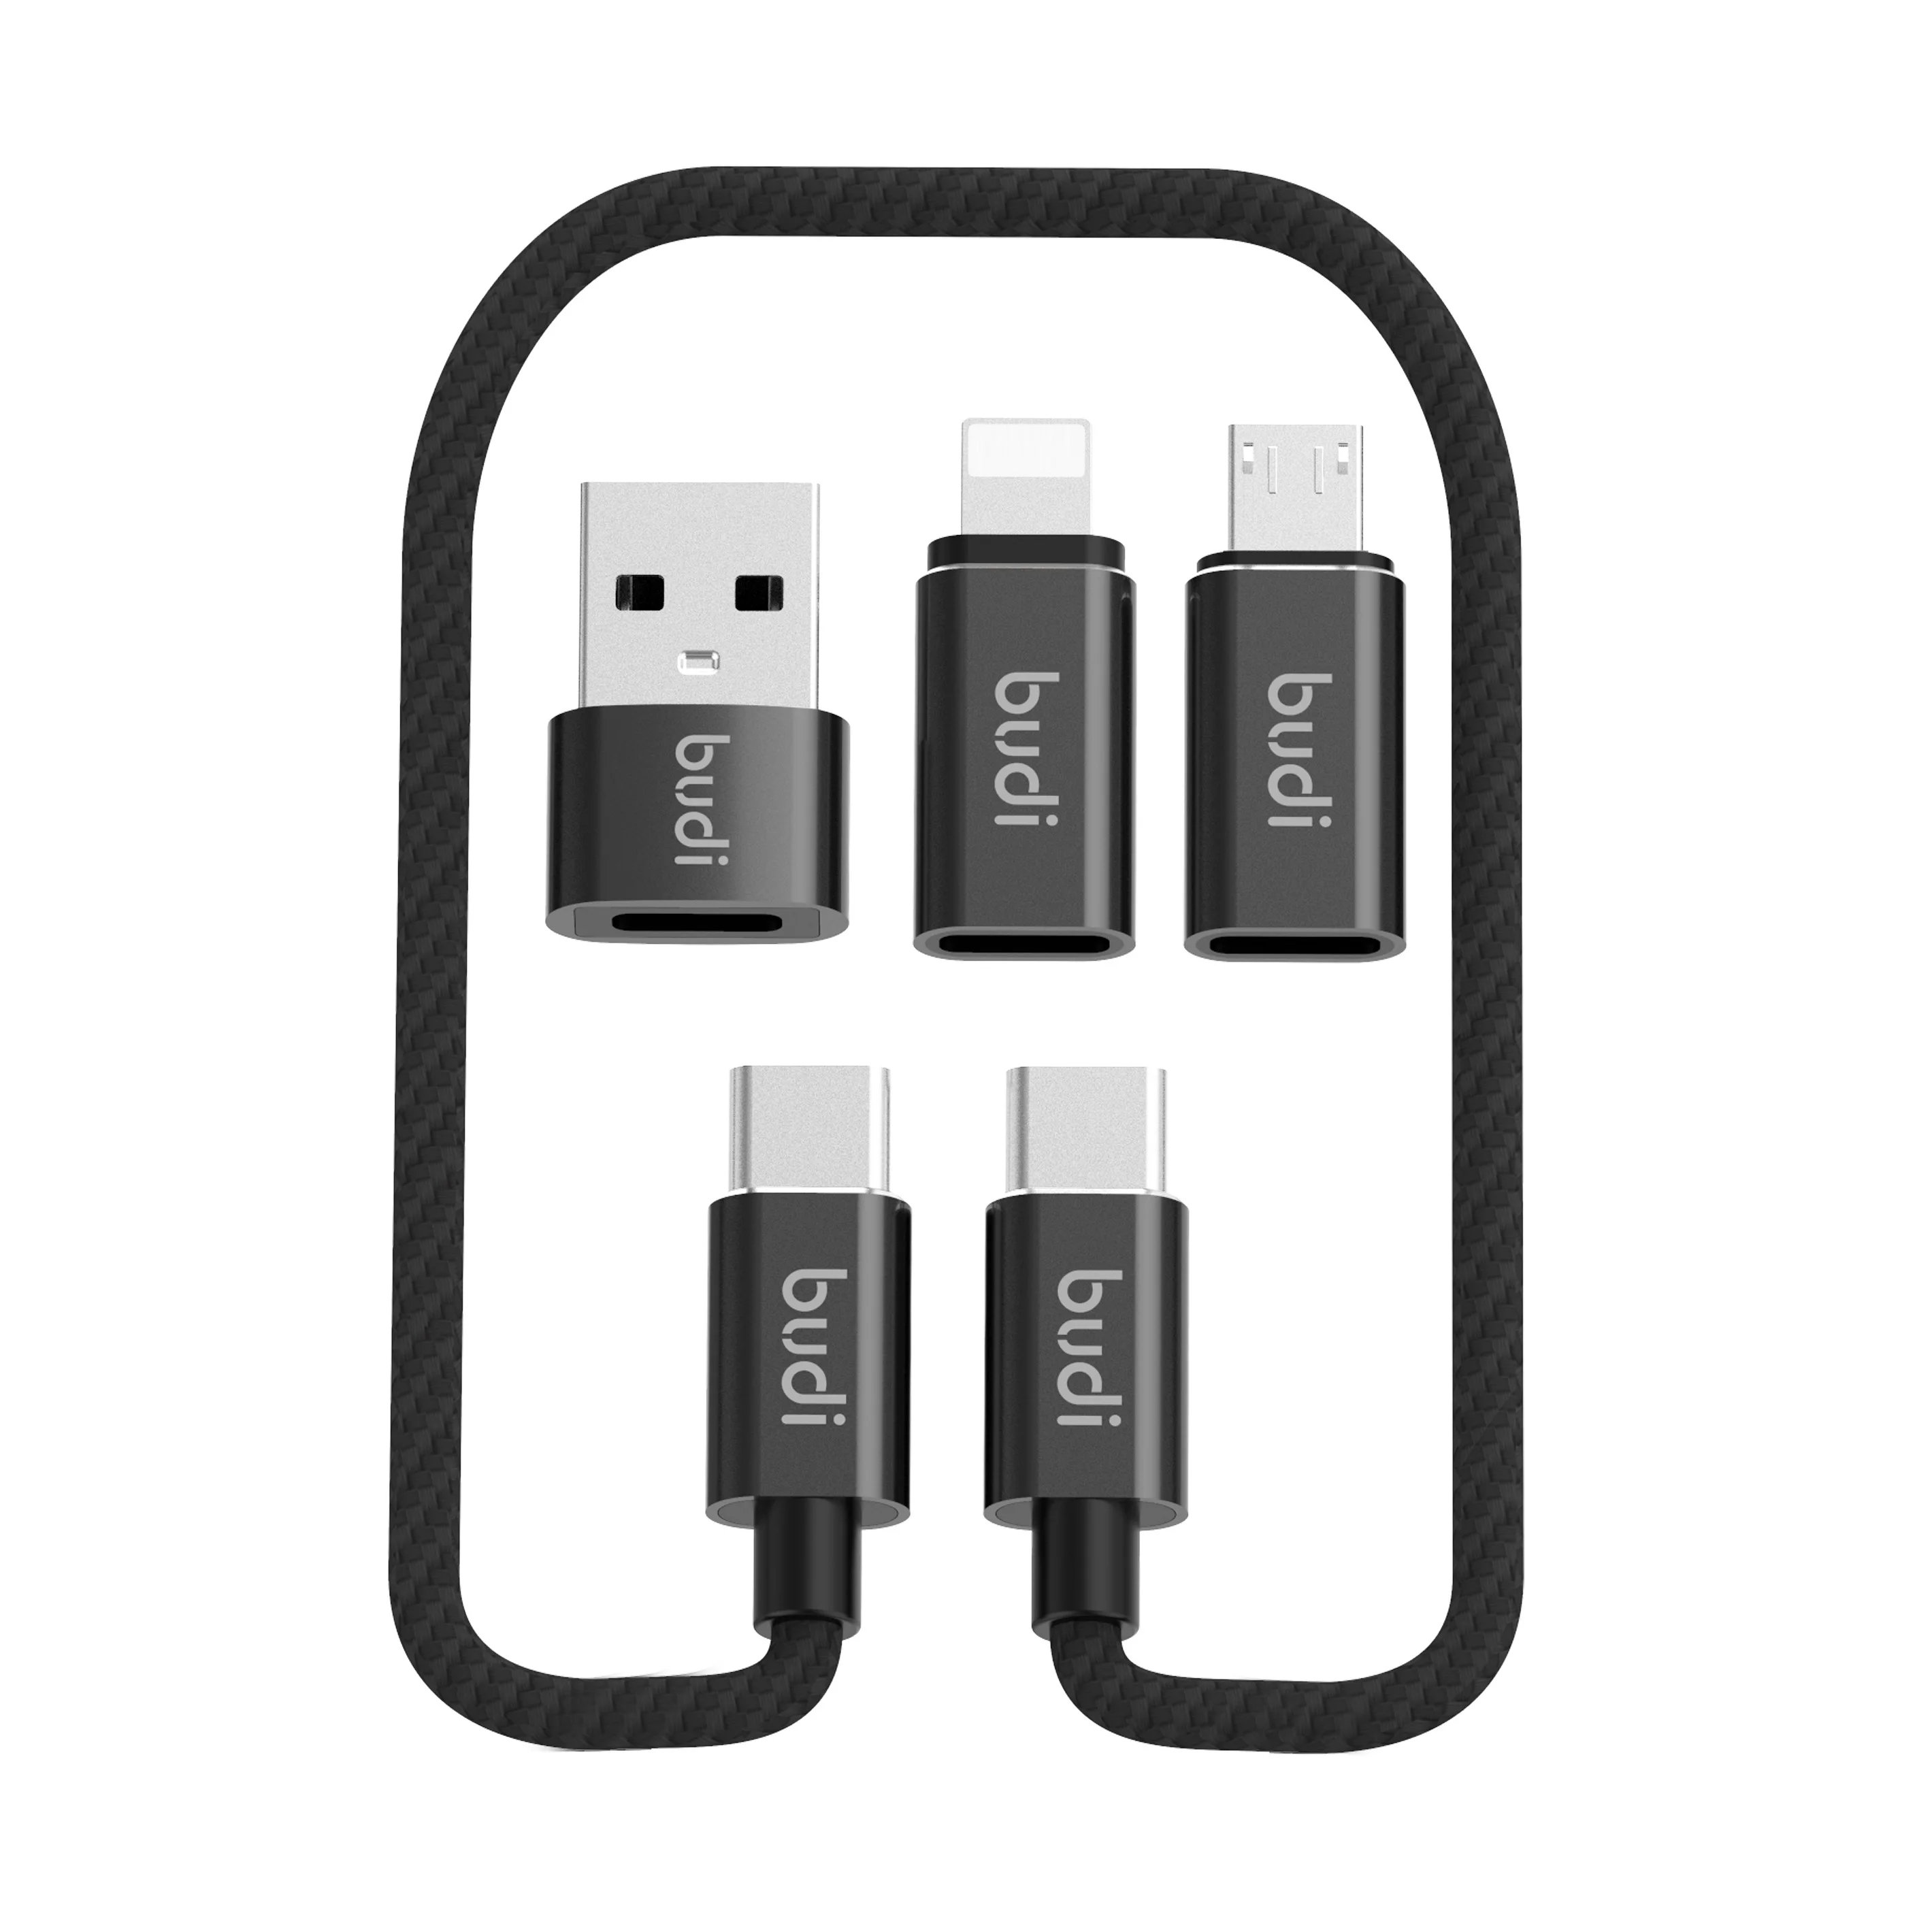 
Multi-Function Urban Survival Card usb c to usb c Charging Cable micro usb converter SIM Eject Pin Phone Holder for Travel Gift 